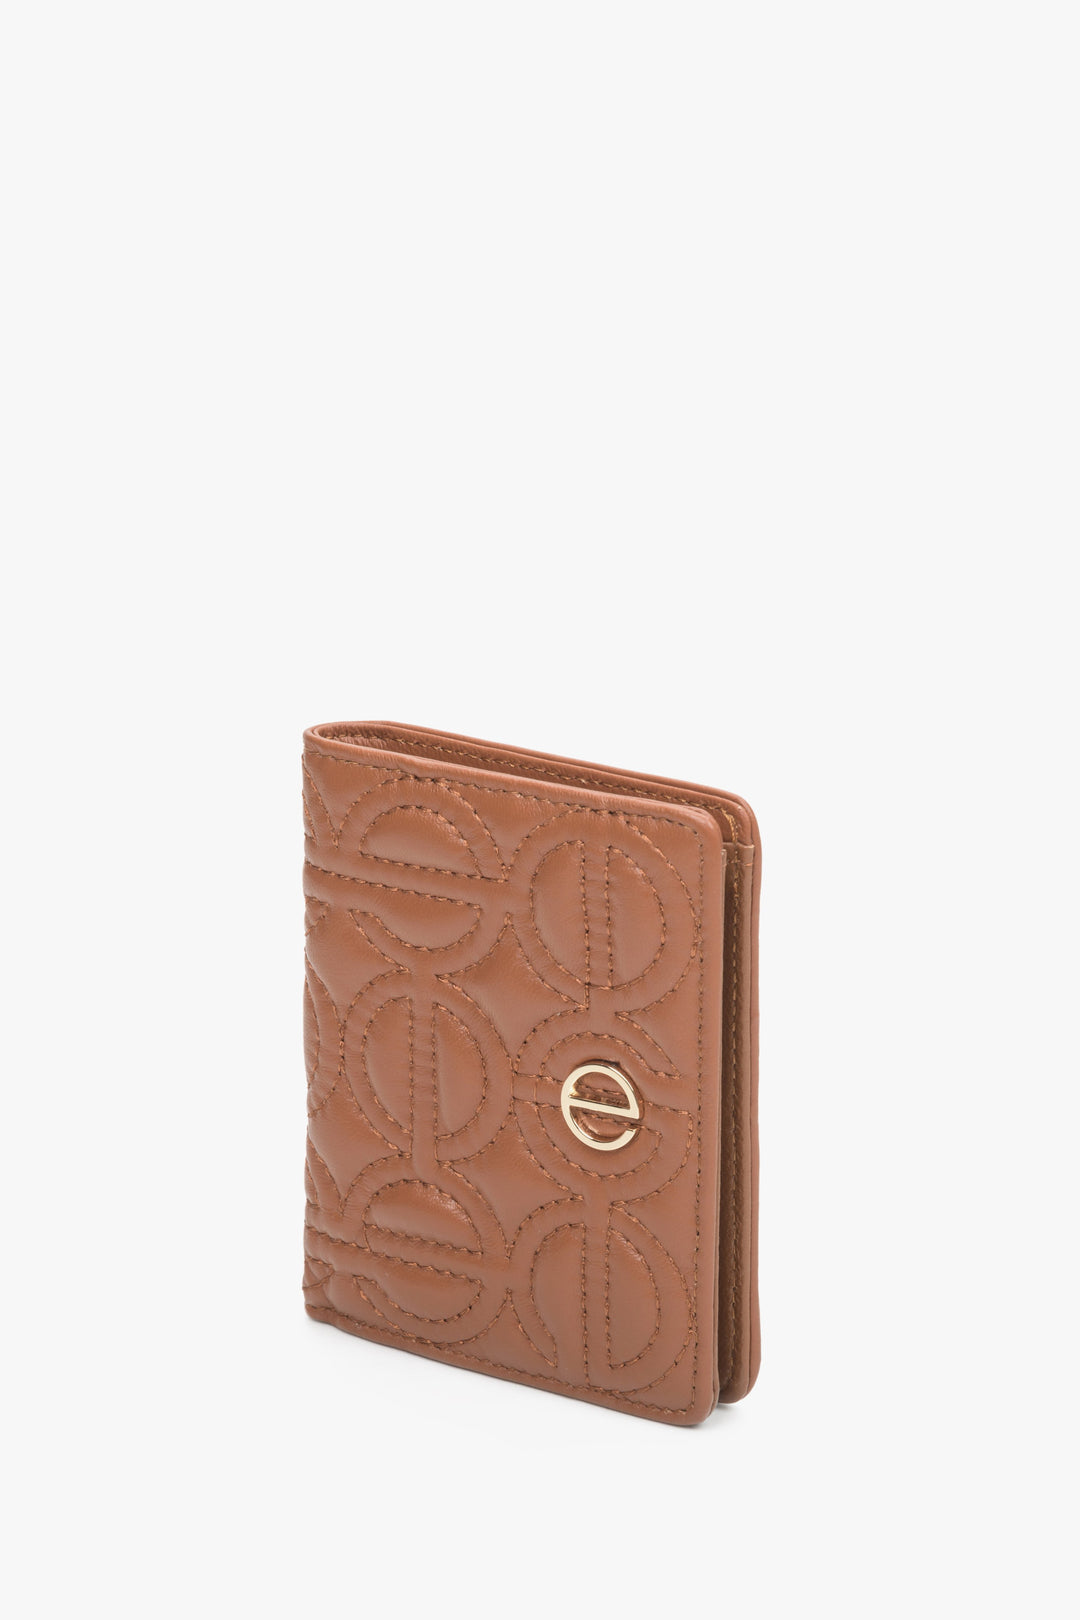 Small women's brown card leather wallet with gold accents by Estro.